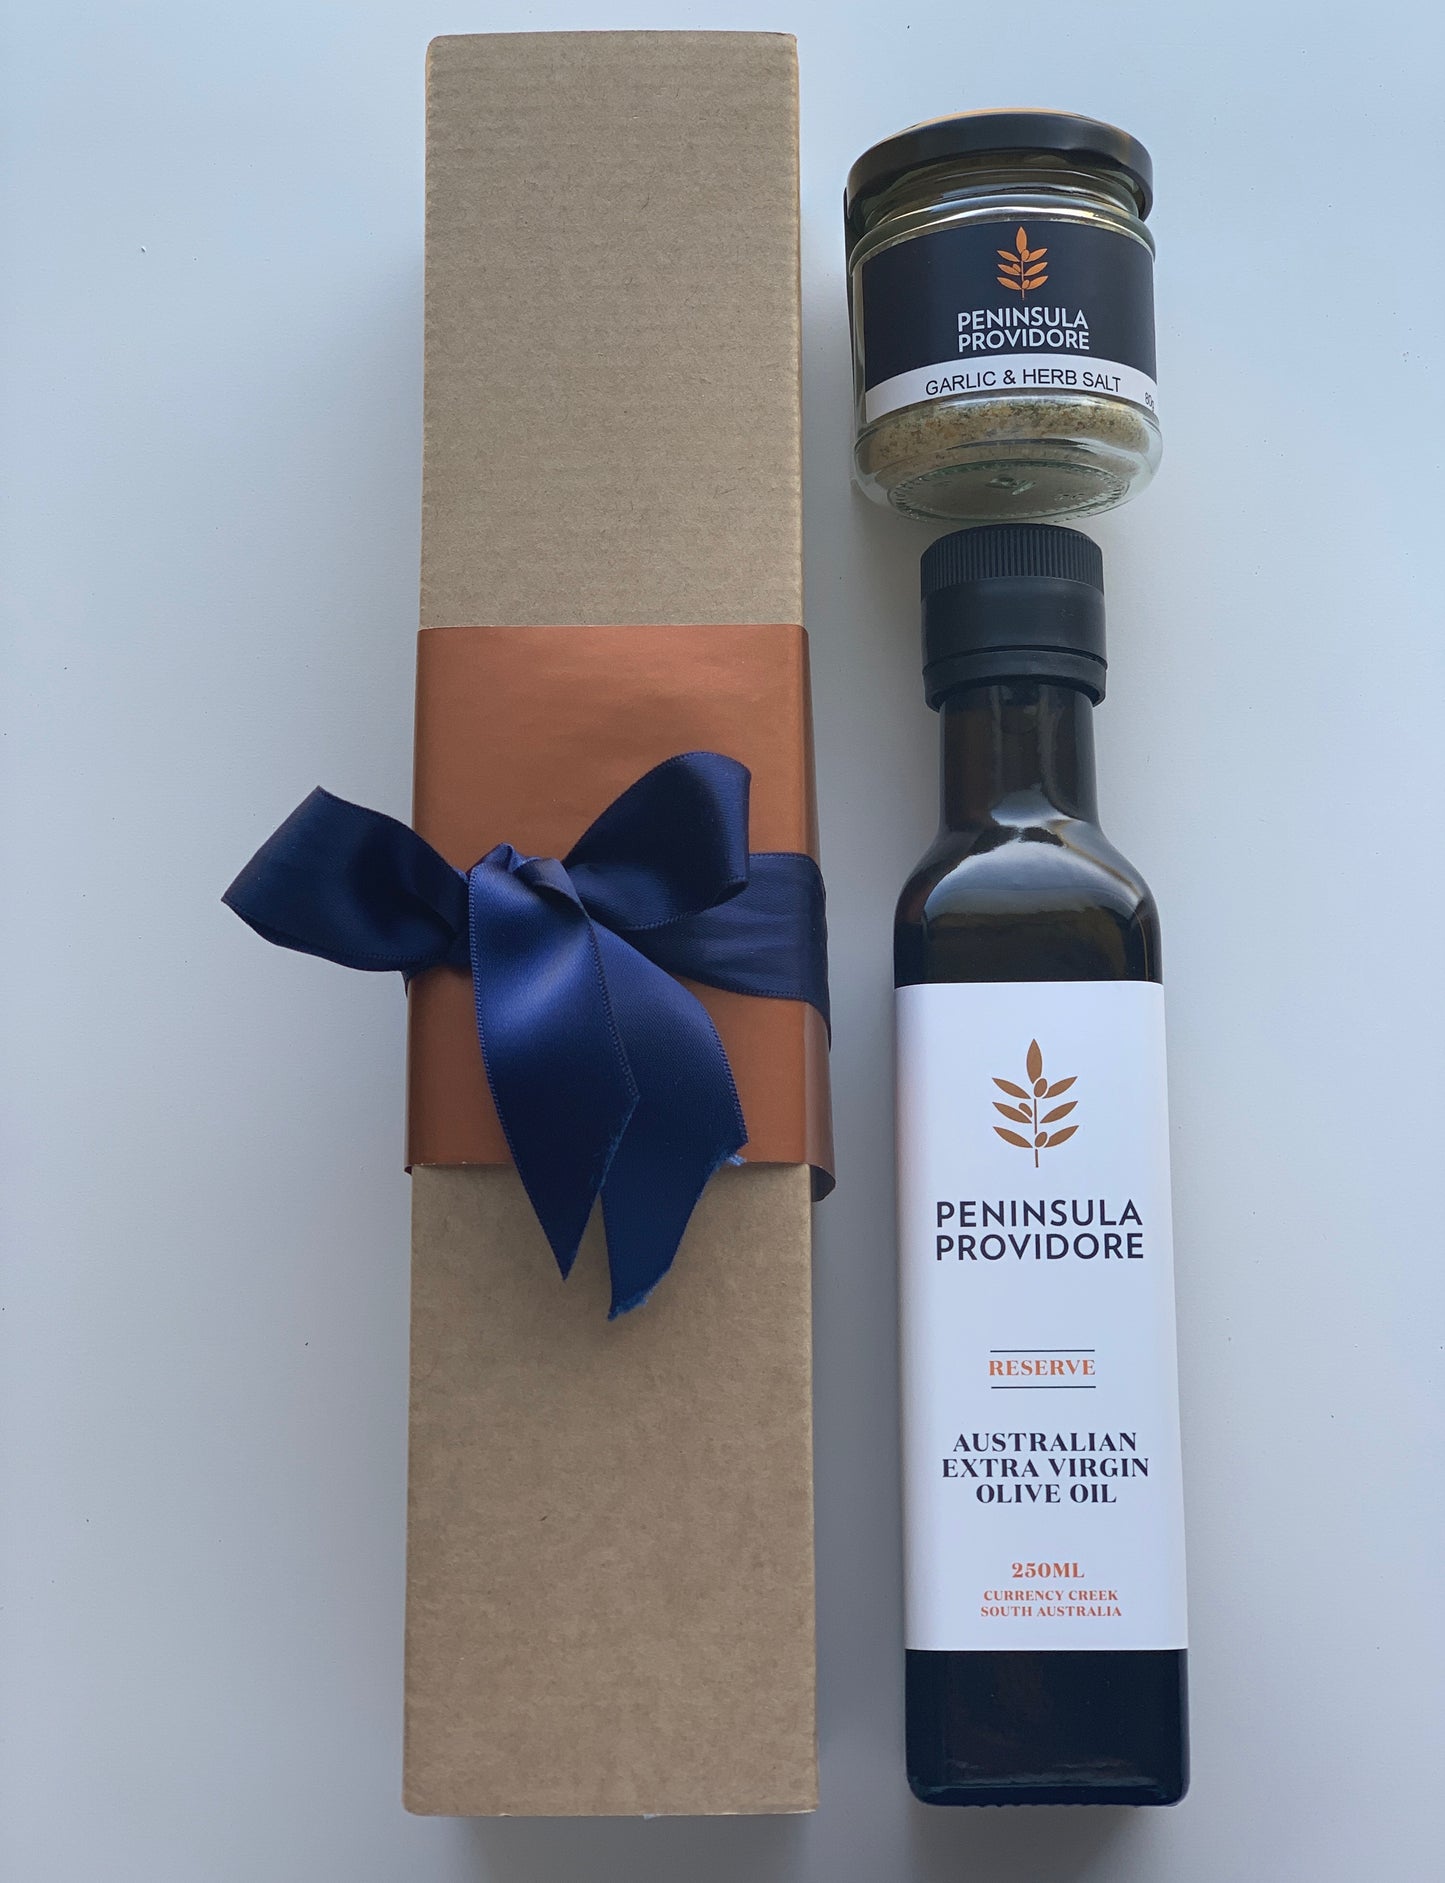 Peninsula Providore Reserve Extra Virgin Olive Oil and Garlic & Herb Giftbox